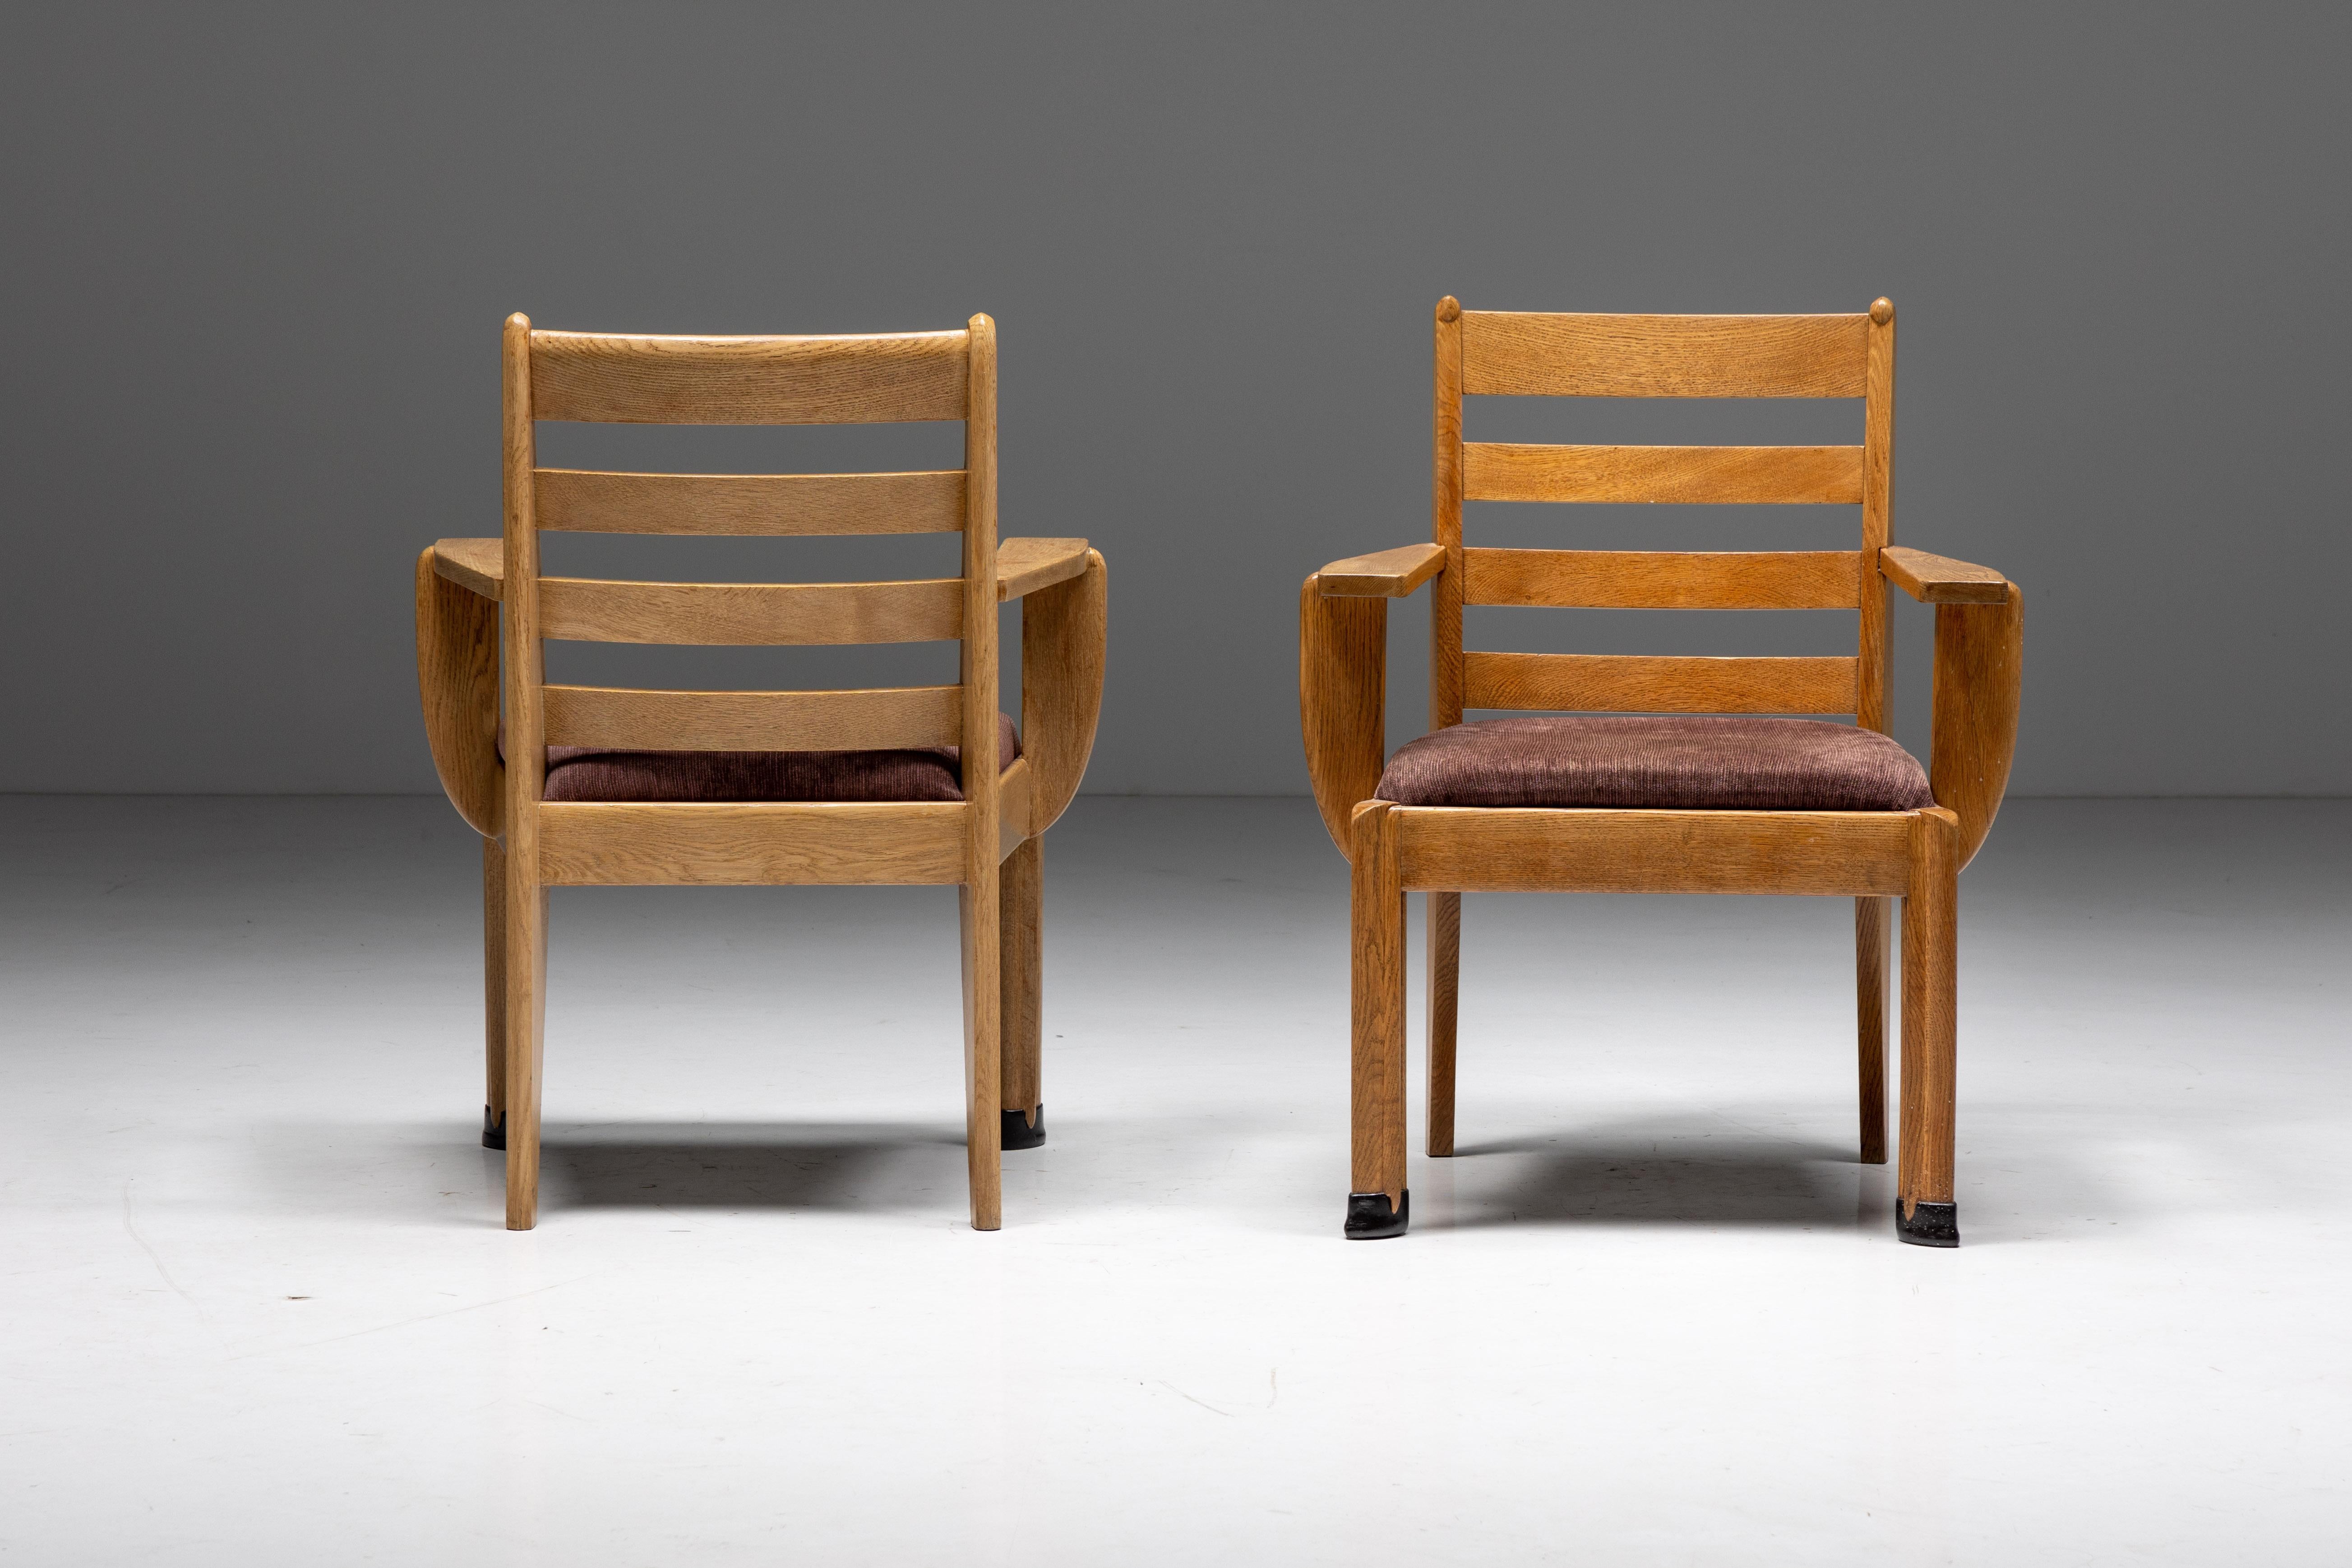 Oak armchairs, Dutch Art Deco era, Hague school, 1928. Minimalist and modern for its time. Truly an Avant-Garde item. Certainly an inspiration for later Scandinavian Modern designers such as Axel Einar Hjorth. The name Rationalism is retroactively